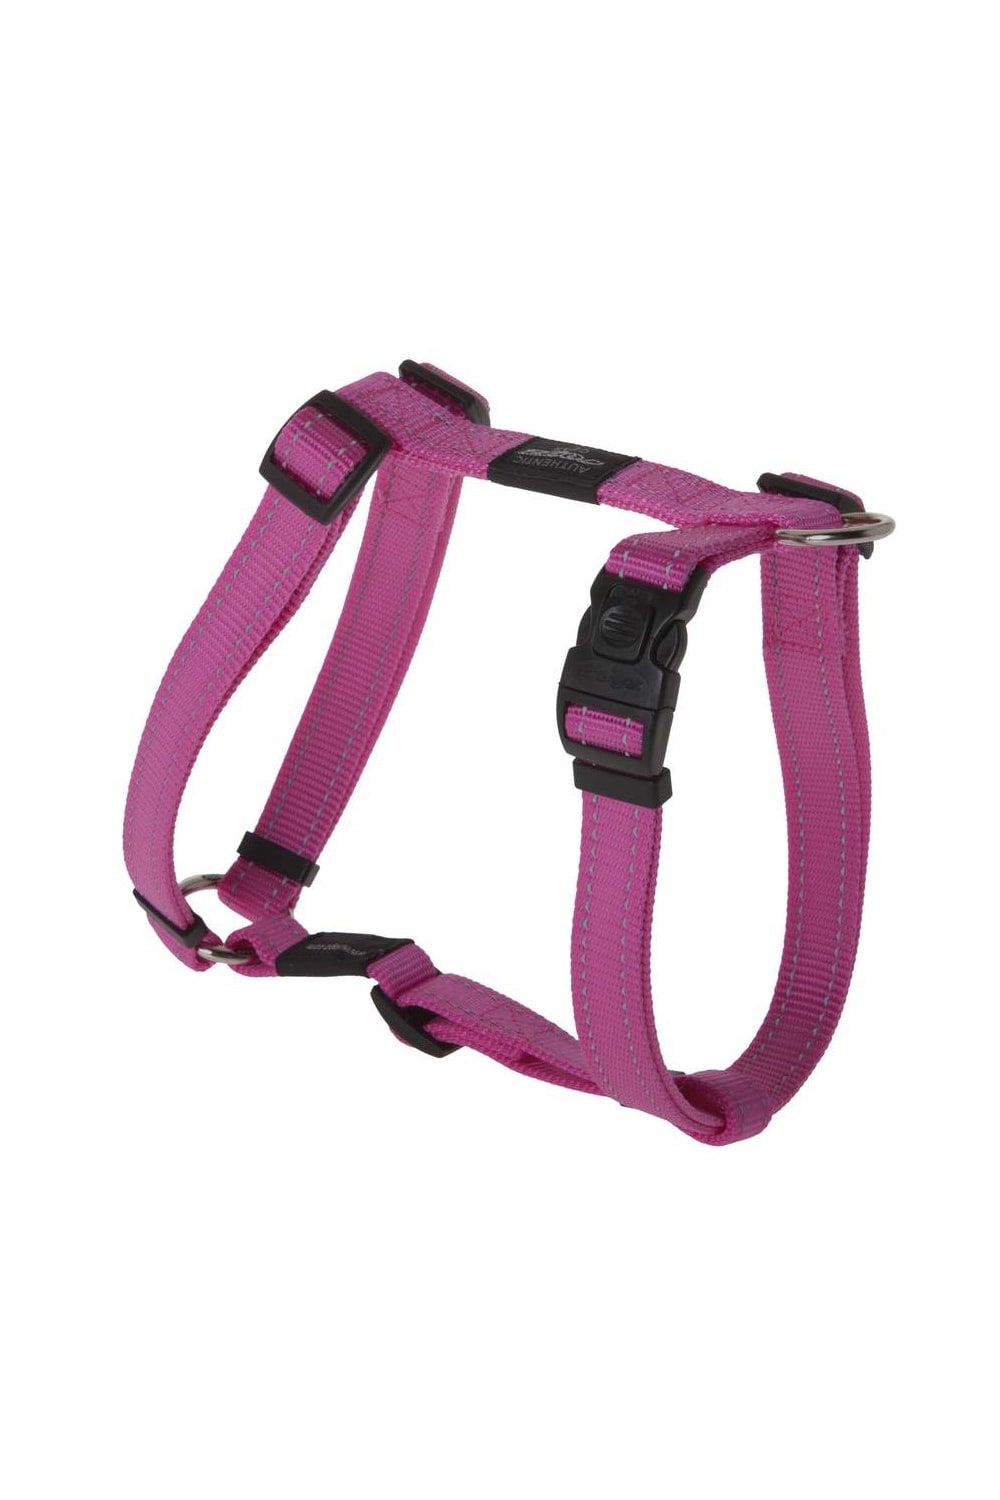 Rogz Utility Dog Harness (Pink) (17.72in - 29.53in)